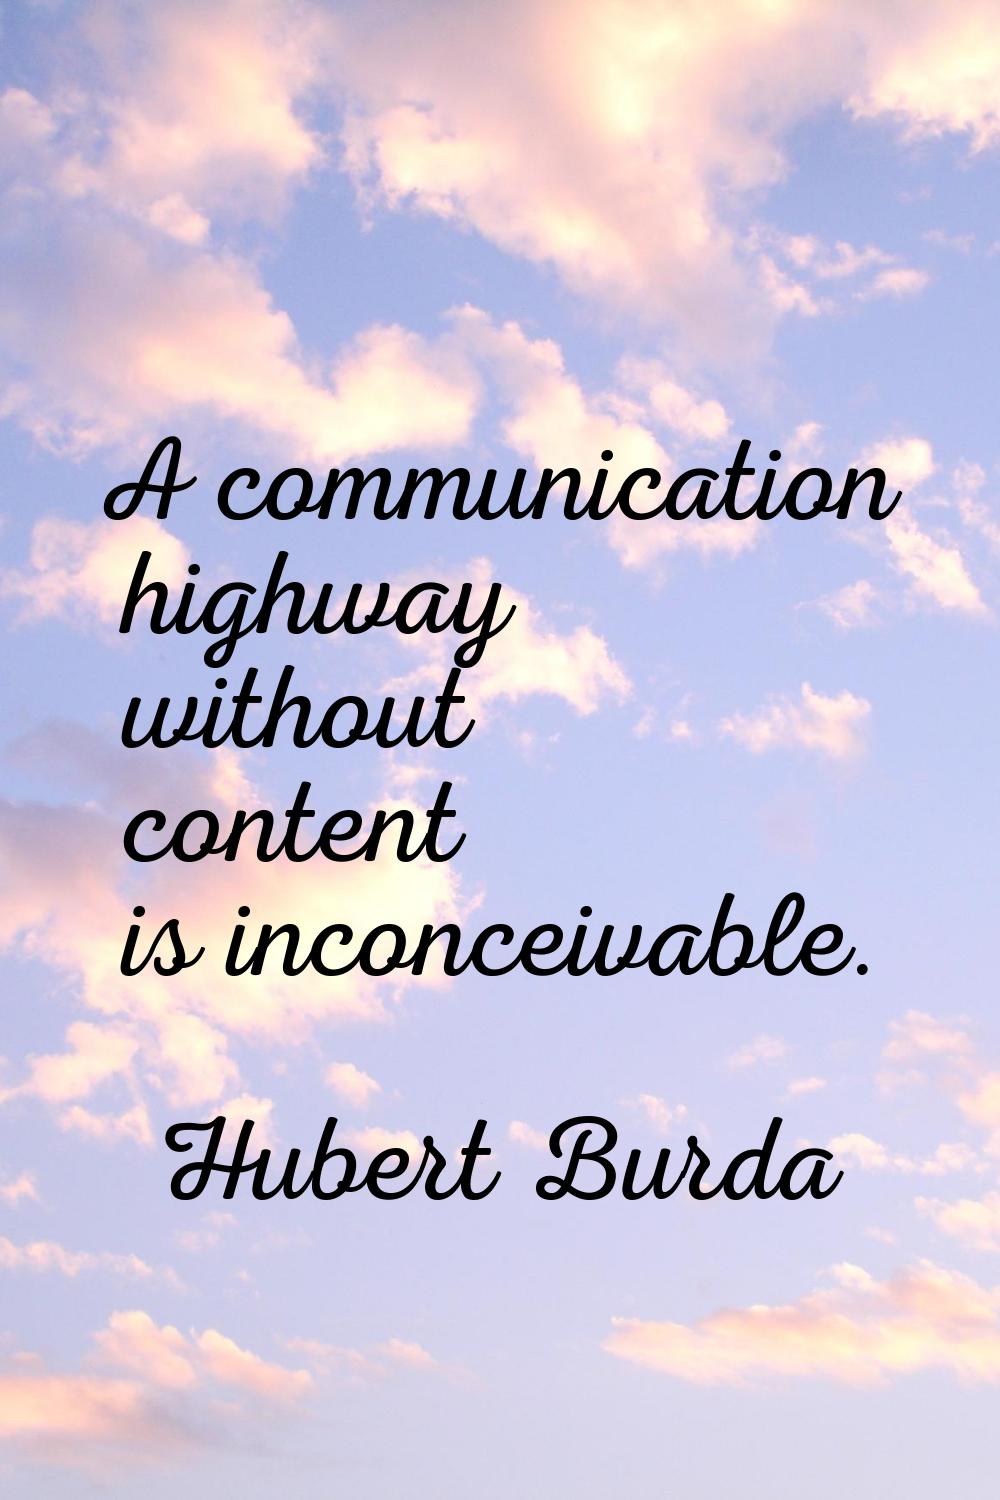 A communication highway without content is inconceivable.